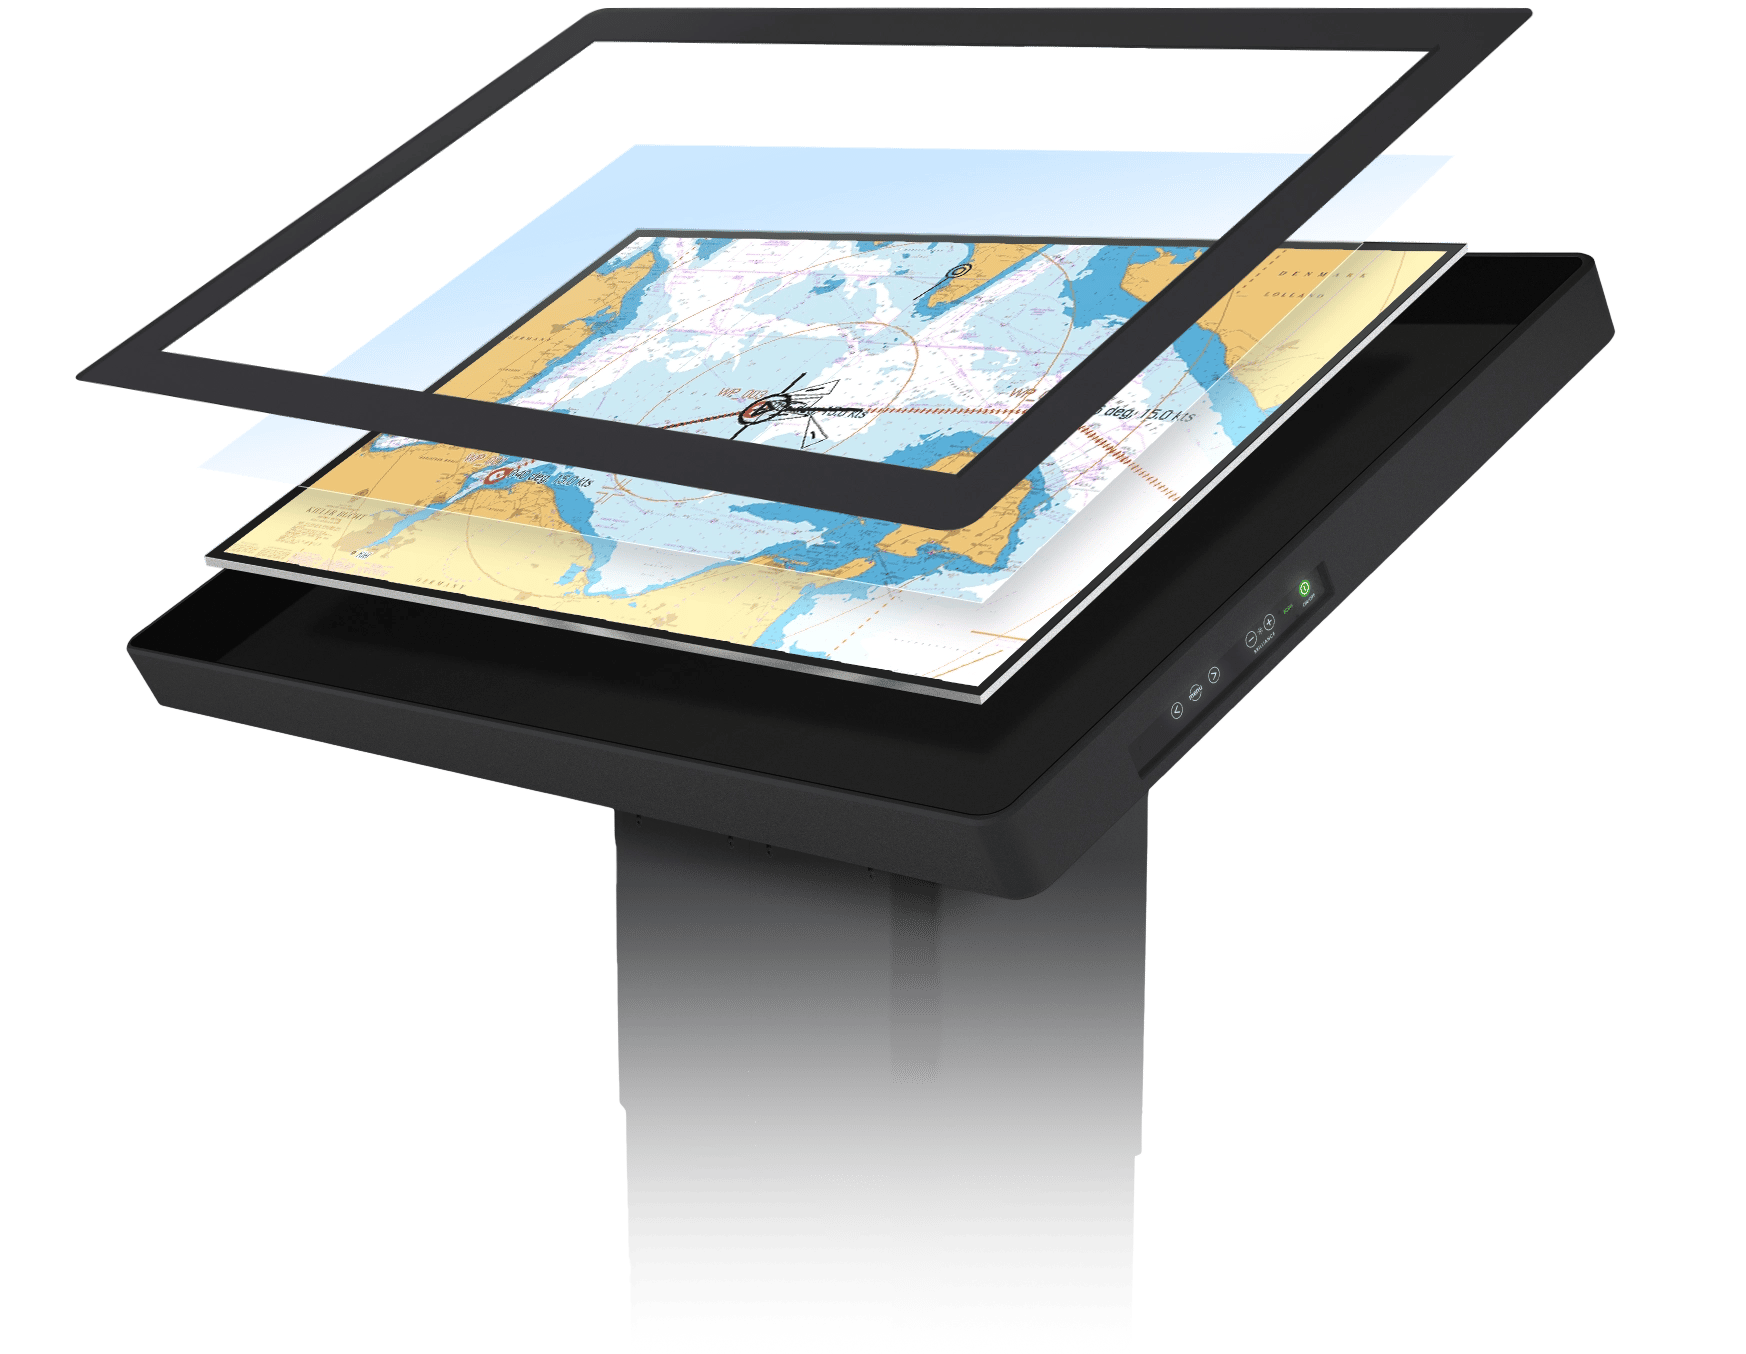 This is an illustration of Hatteland Technology's 55-inch electronic chart table. The front glass has been lifted off to indicate the layers it comes with. Polarizer material, optical bonding (optional) and a touch-enabled glass. The screen shows a digital nautical chart in colors. 